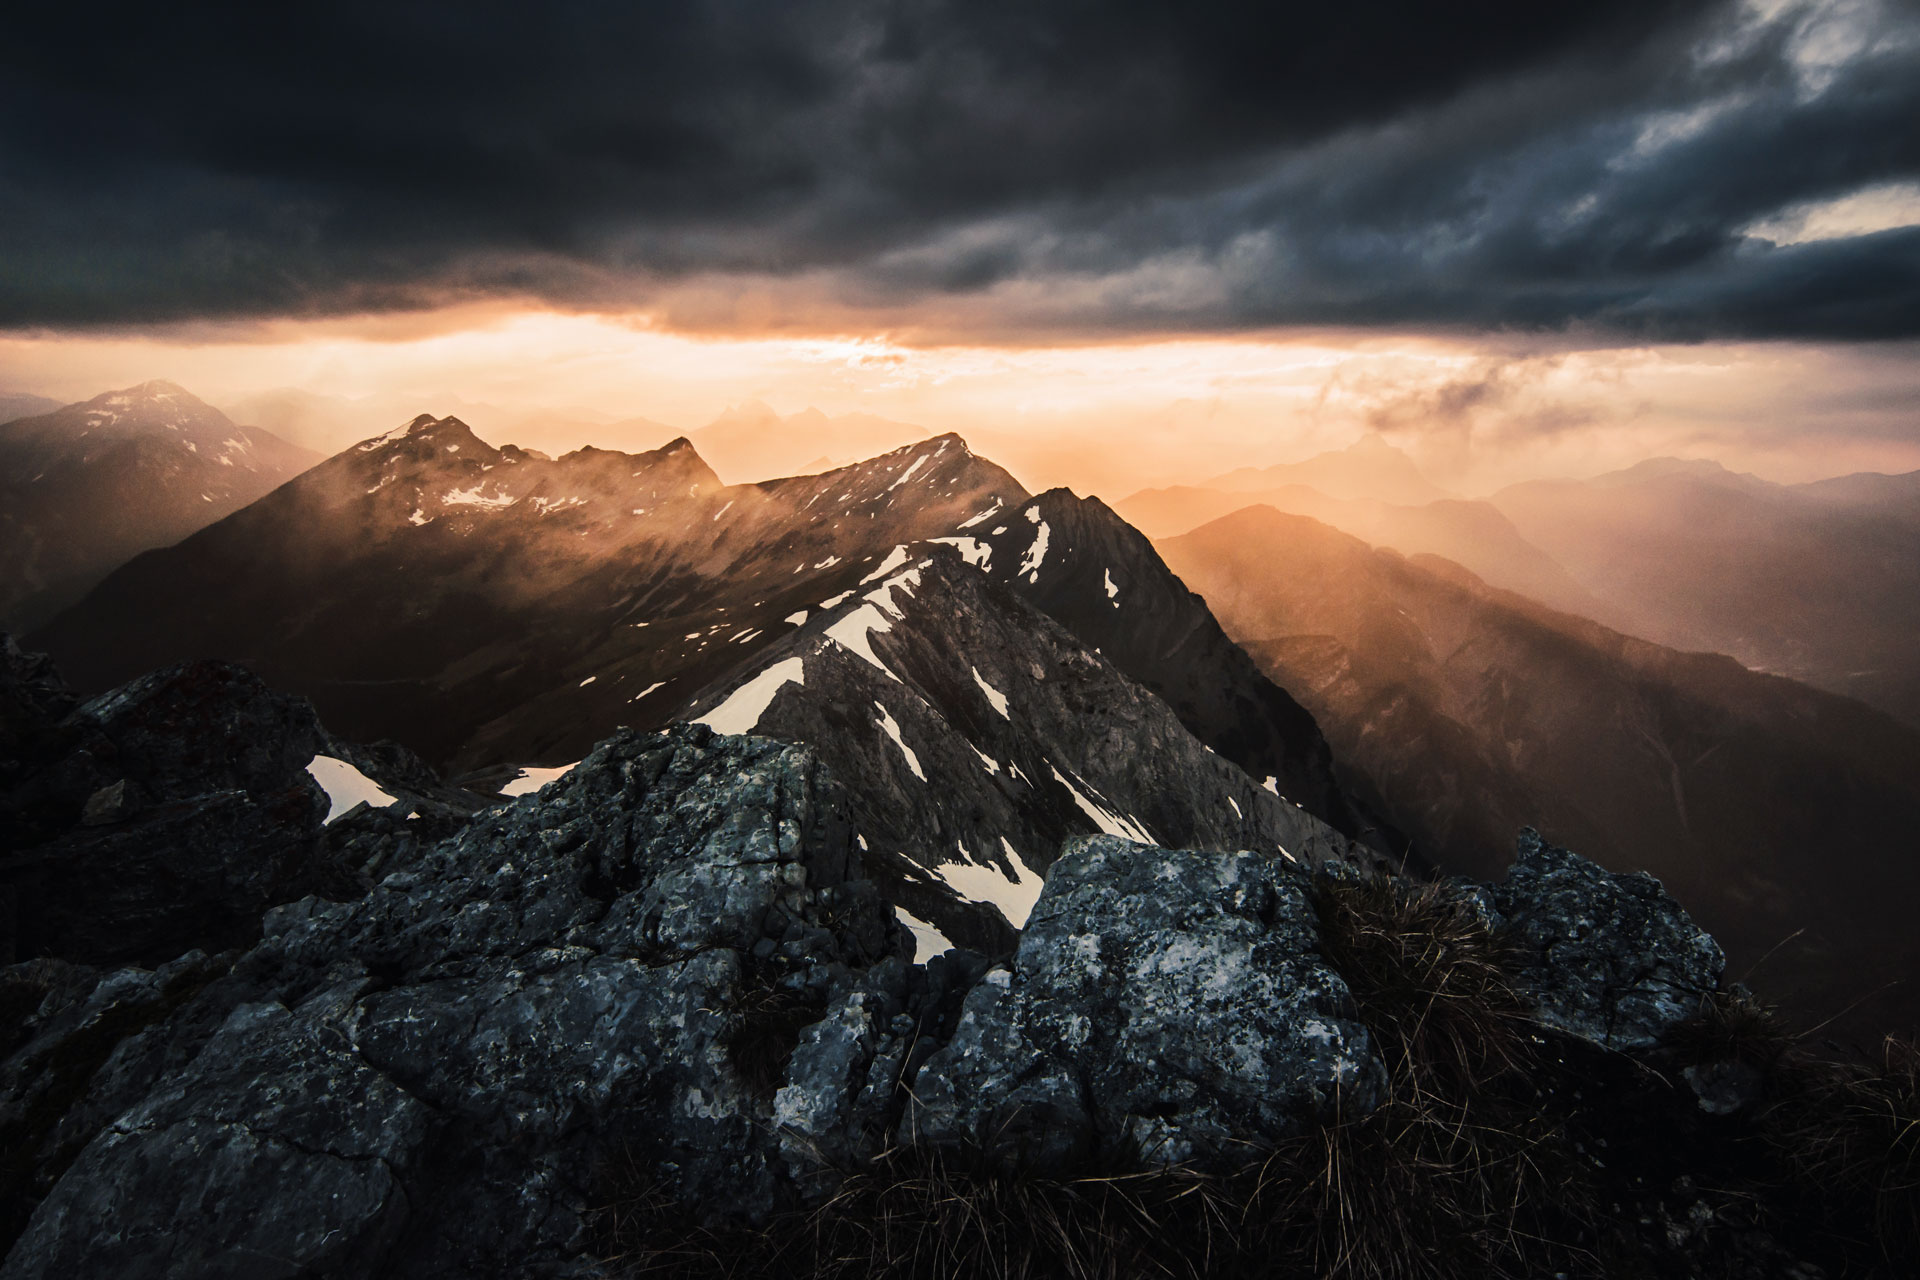 Photo of a sunset after a storm with mountain tops in the backgroung and rocks in the foreground taken from the top of Ups Spitze, Austria.